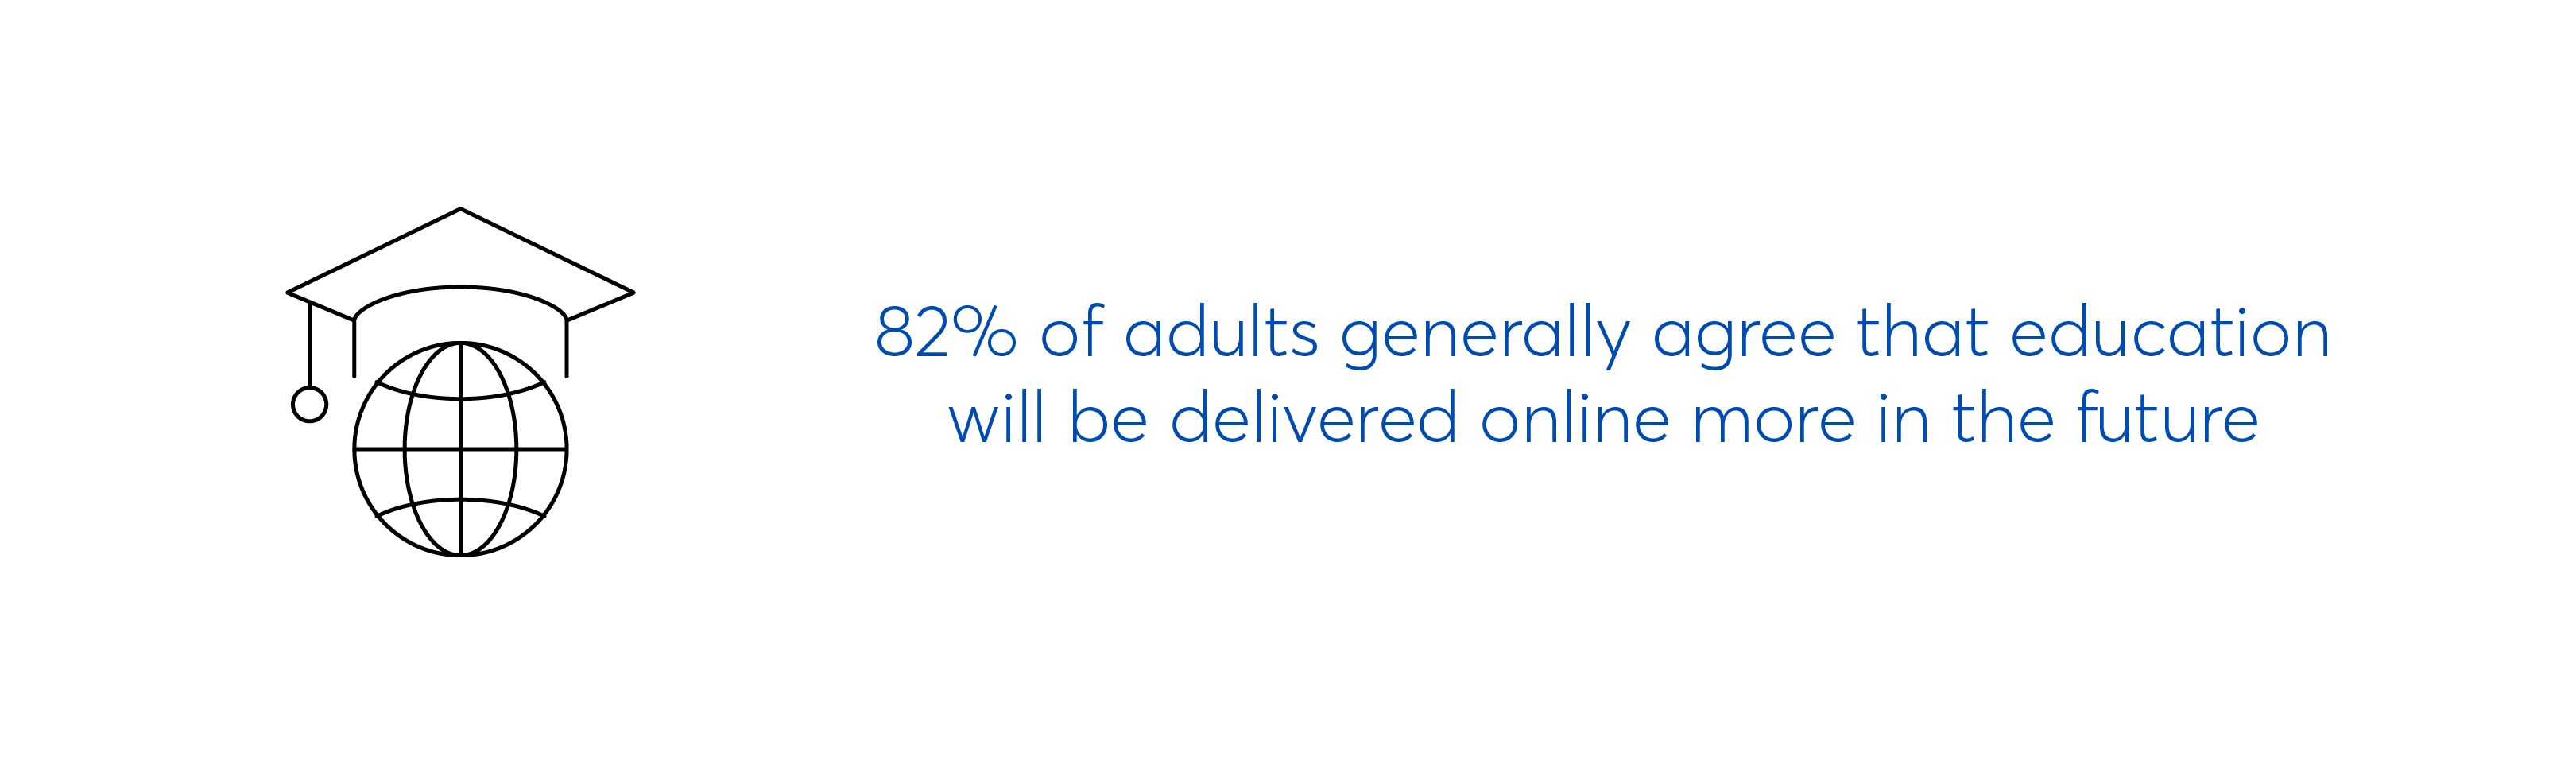 Adults generally believe educations will be delivered online more